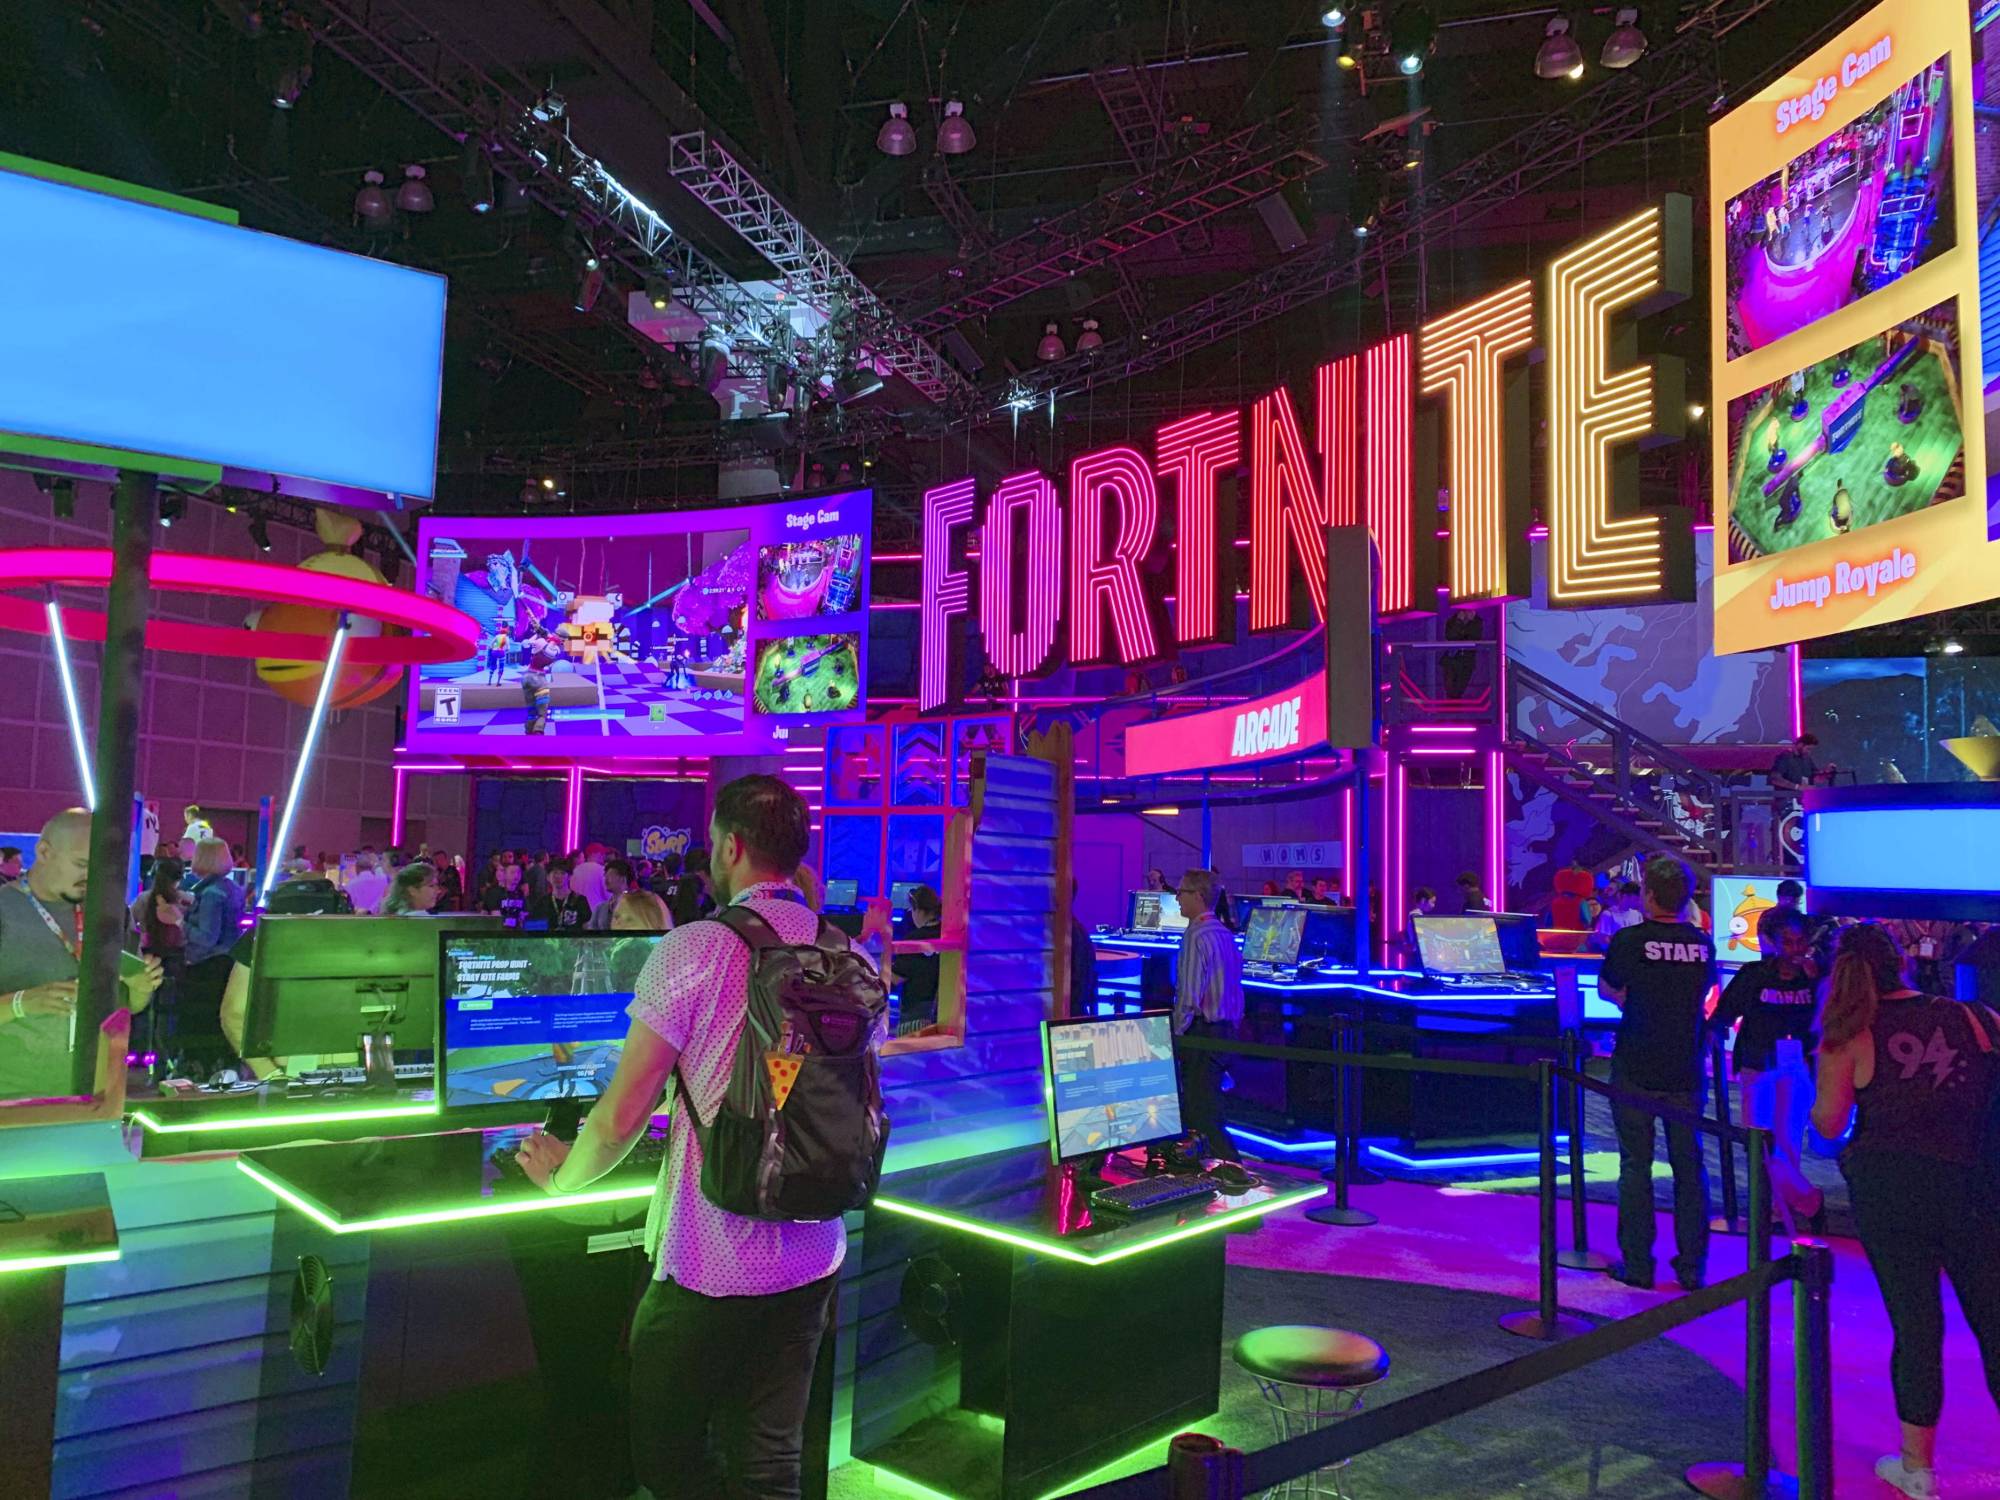 Sony Invests $250 Million in 'Fortnite' Creator Epic Games